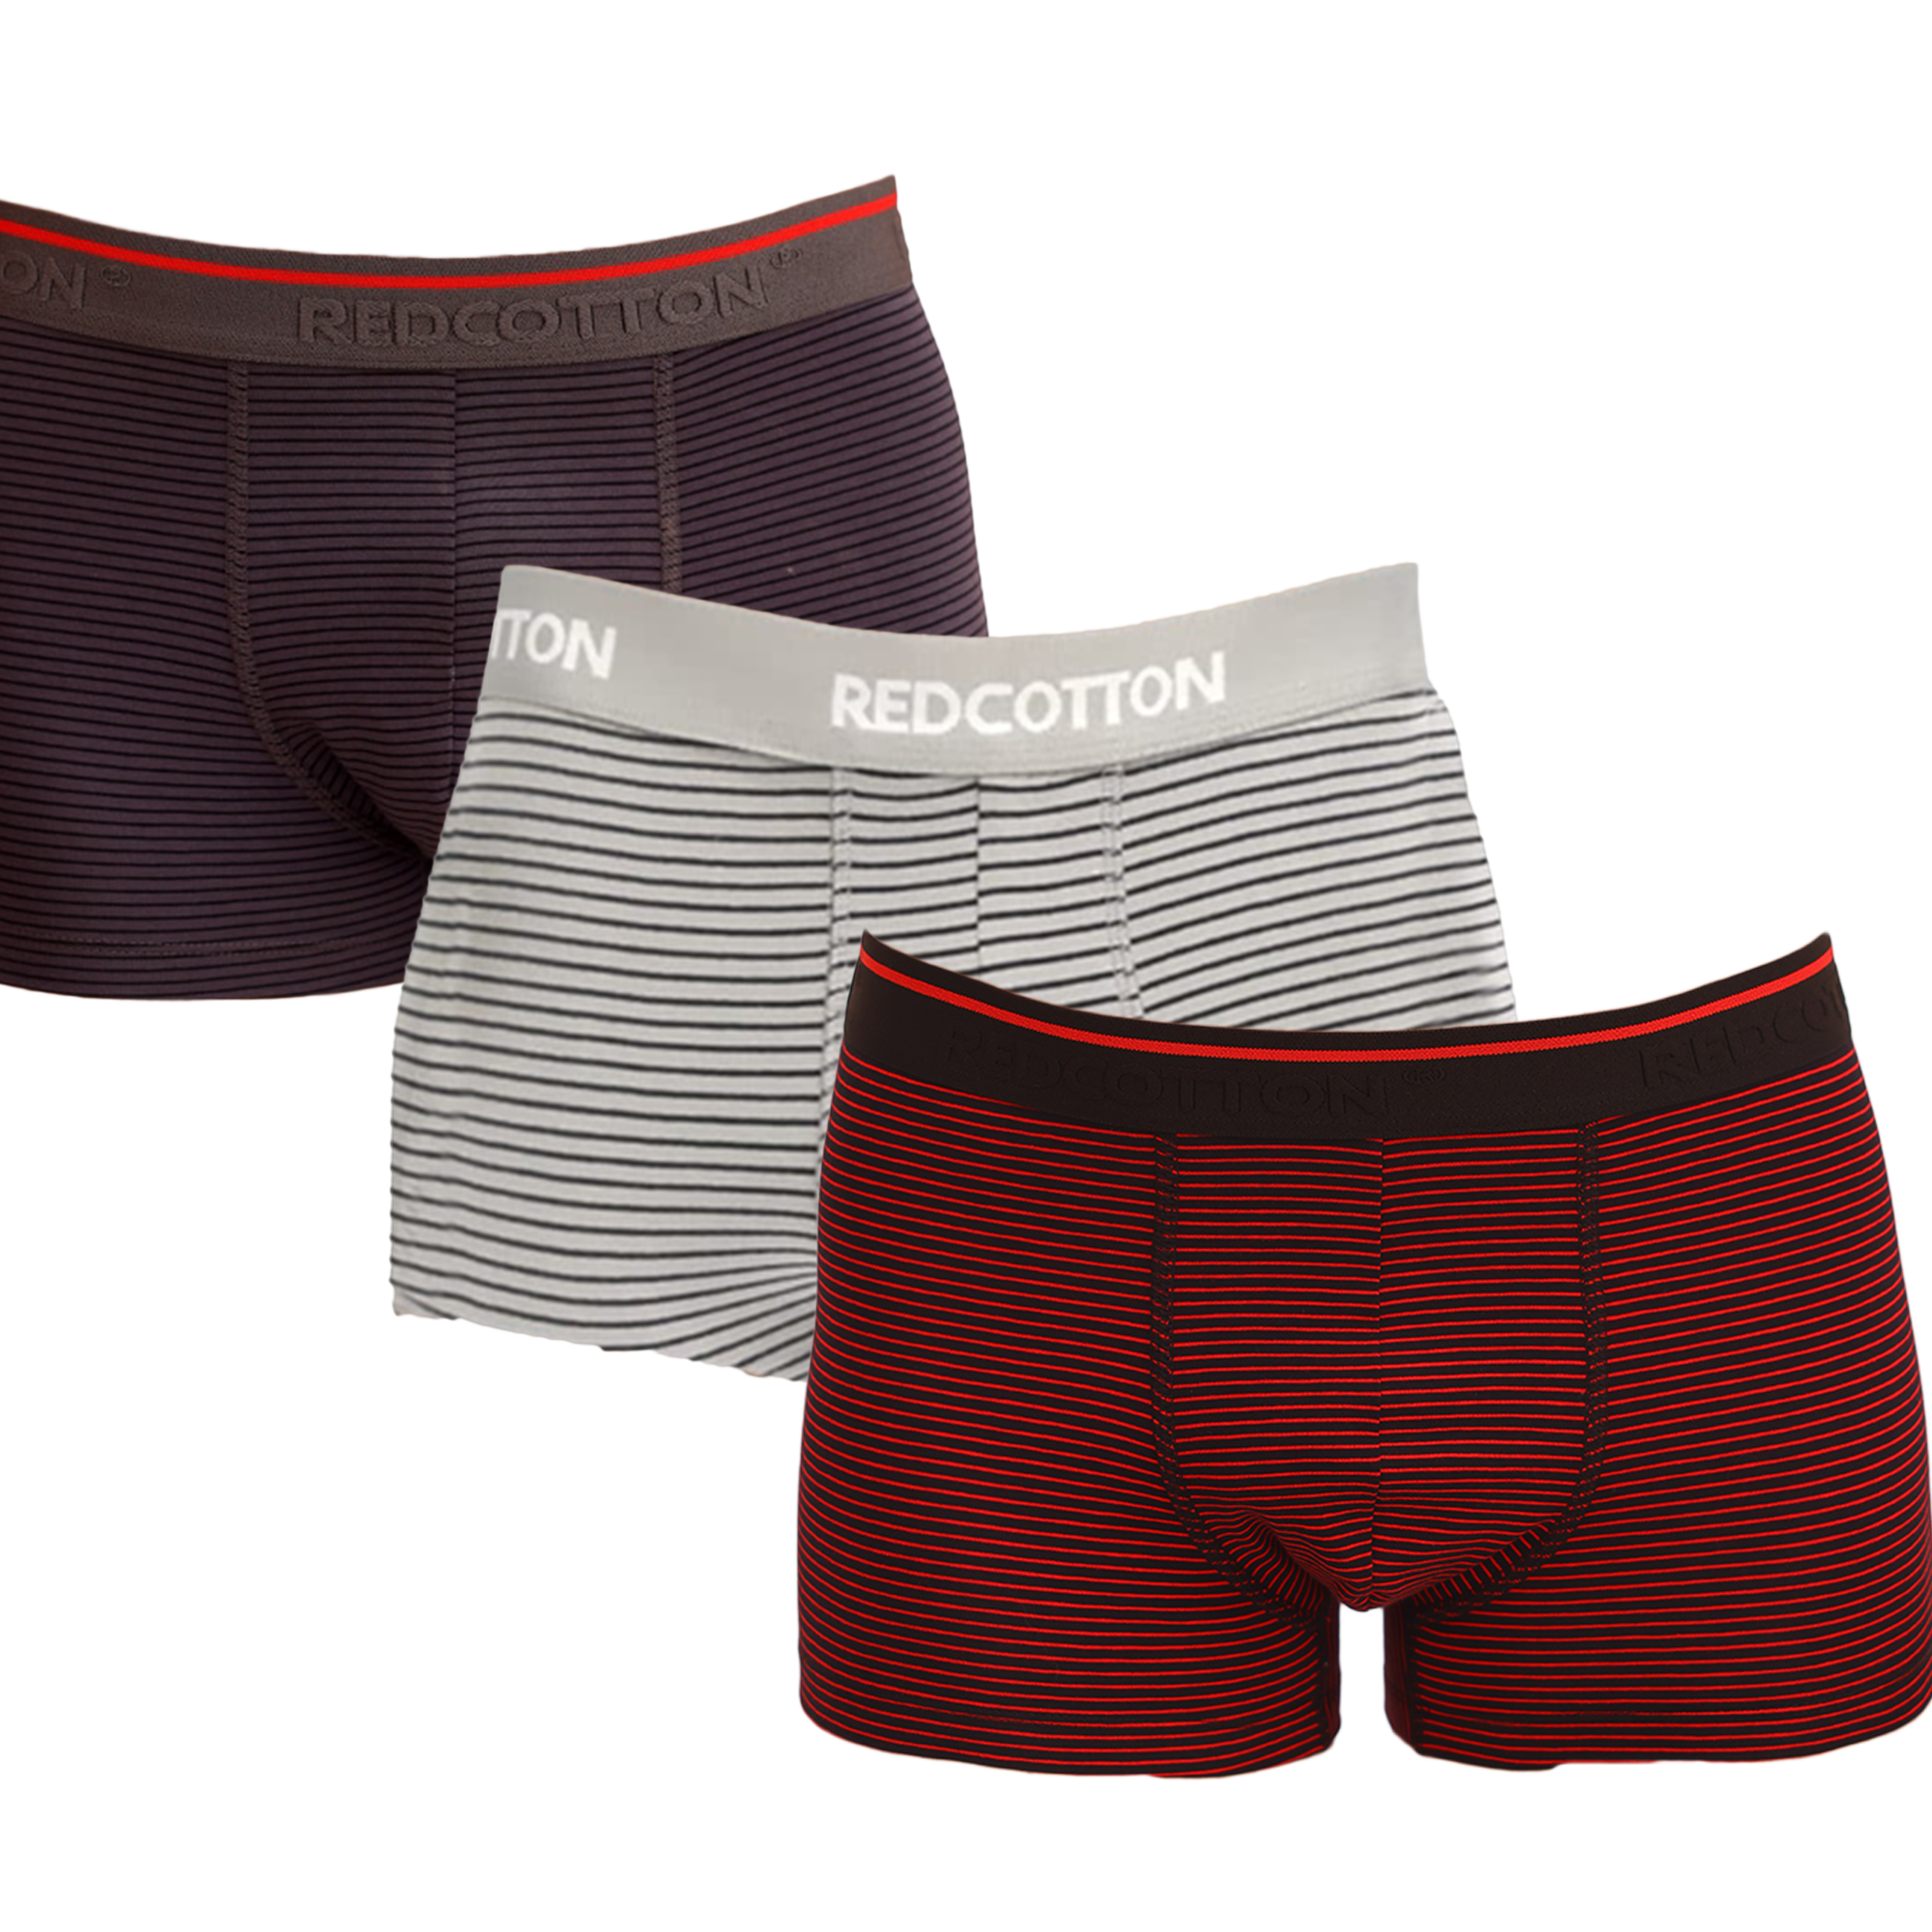 Pack Of 3 Striped Cotton Boxers For Men